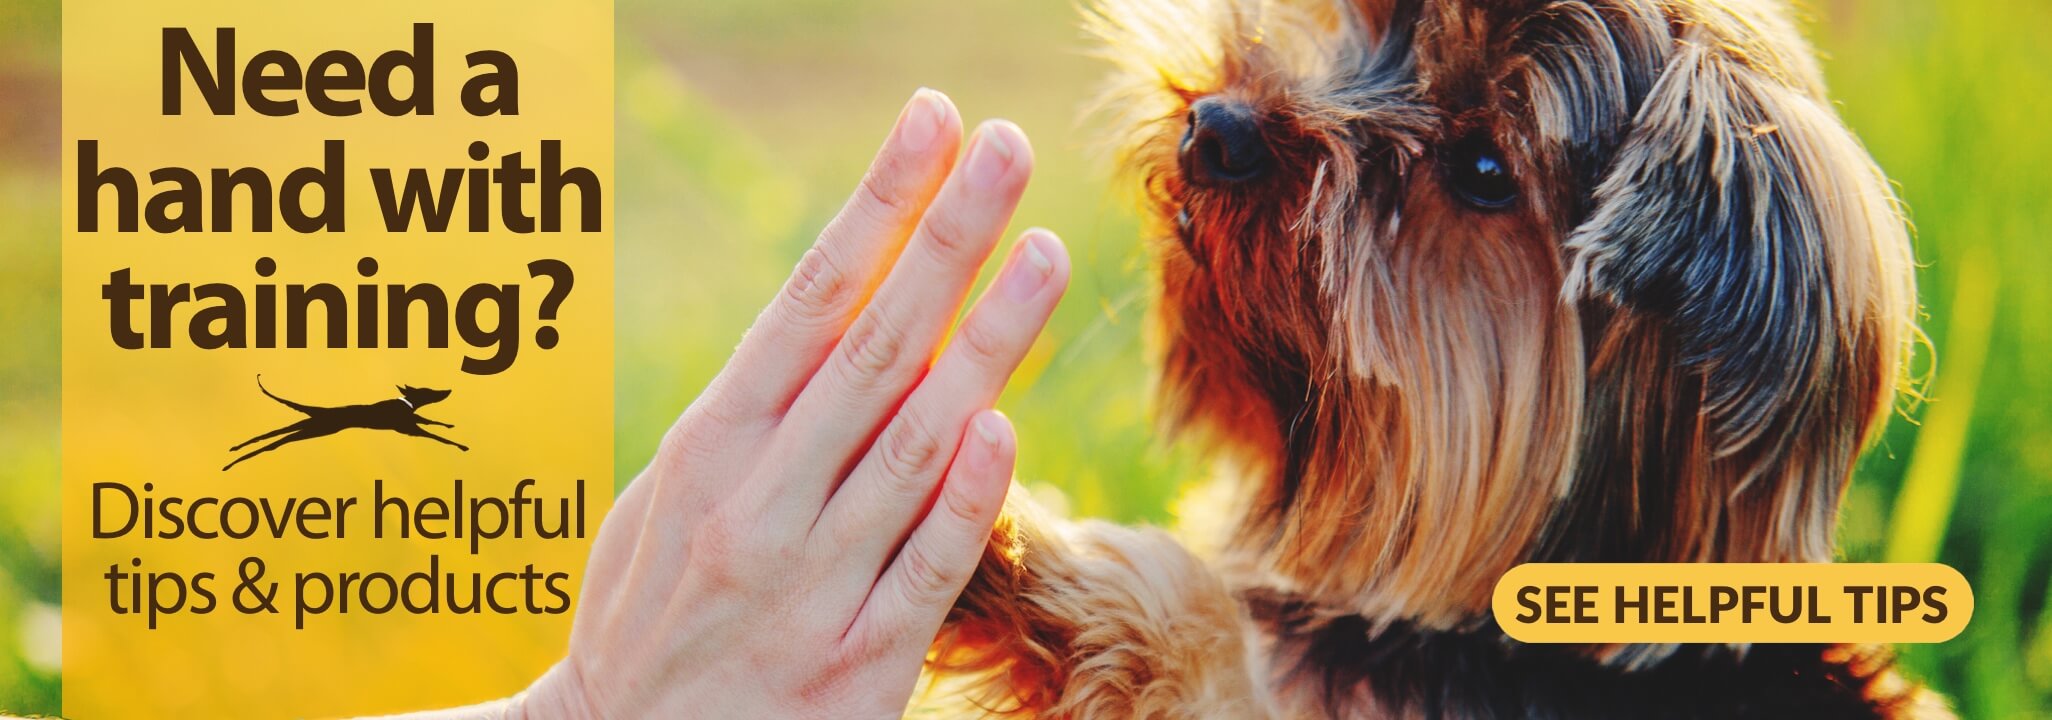 Yorkie giving high five to owner with caption Need a Hand with Training? Discover helpful tips and products. See Helpful Tips